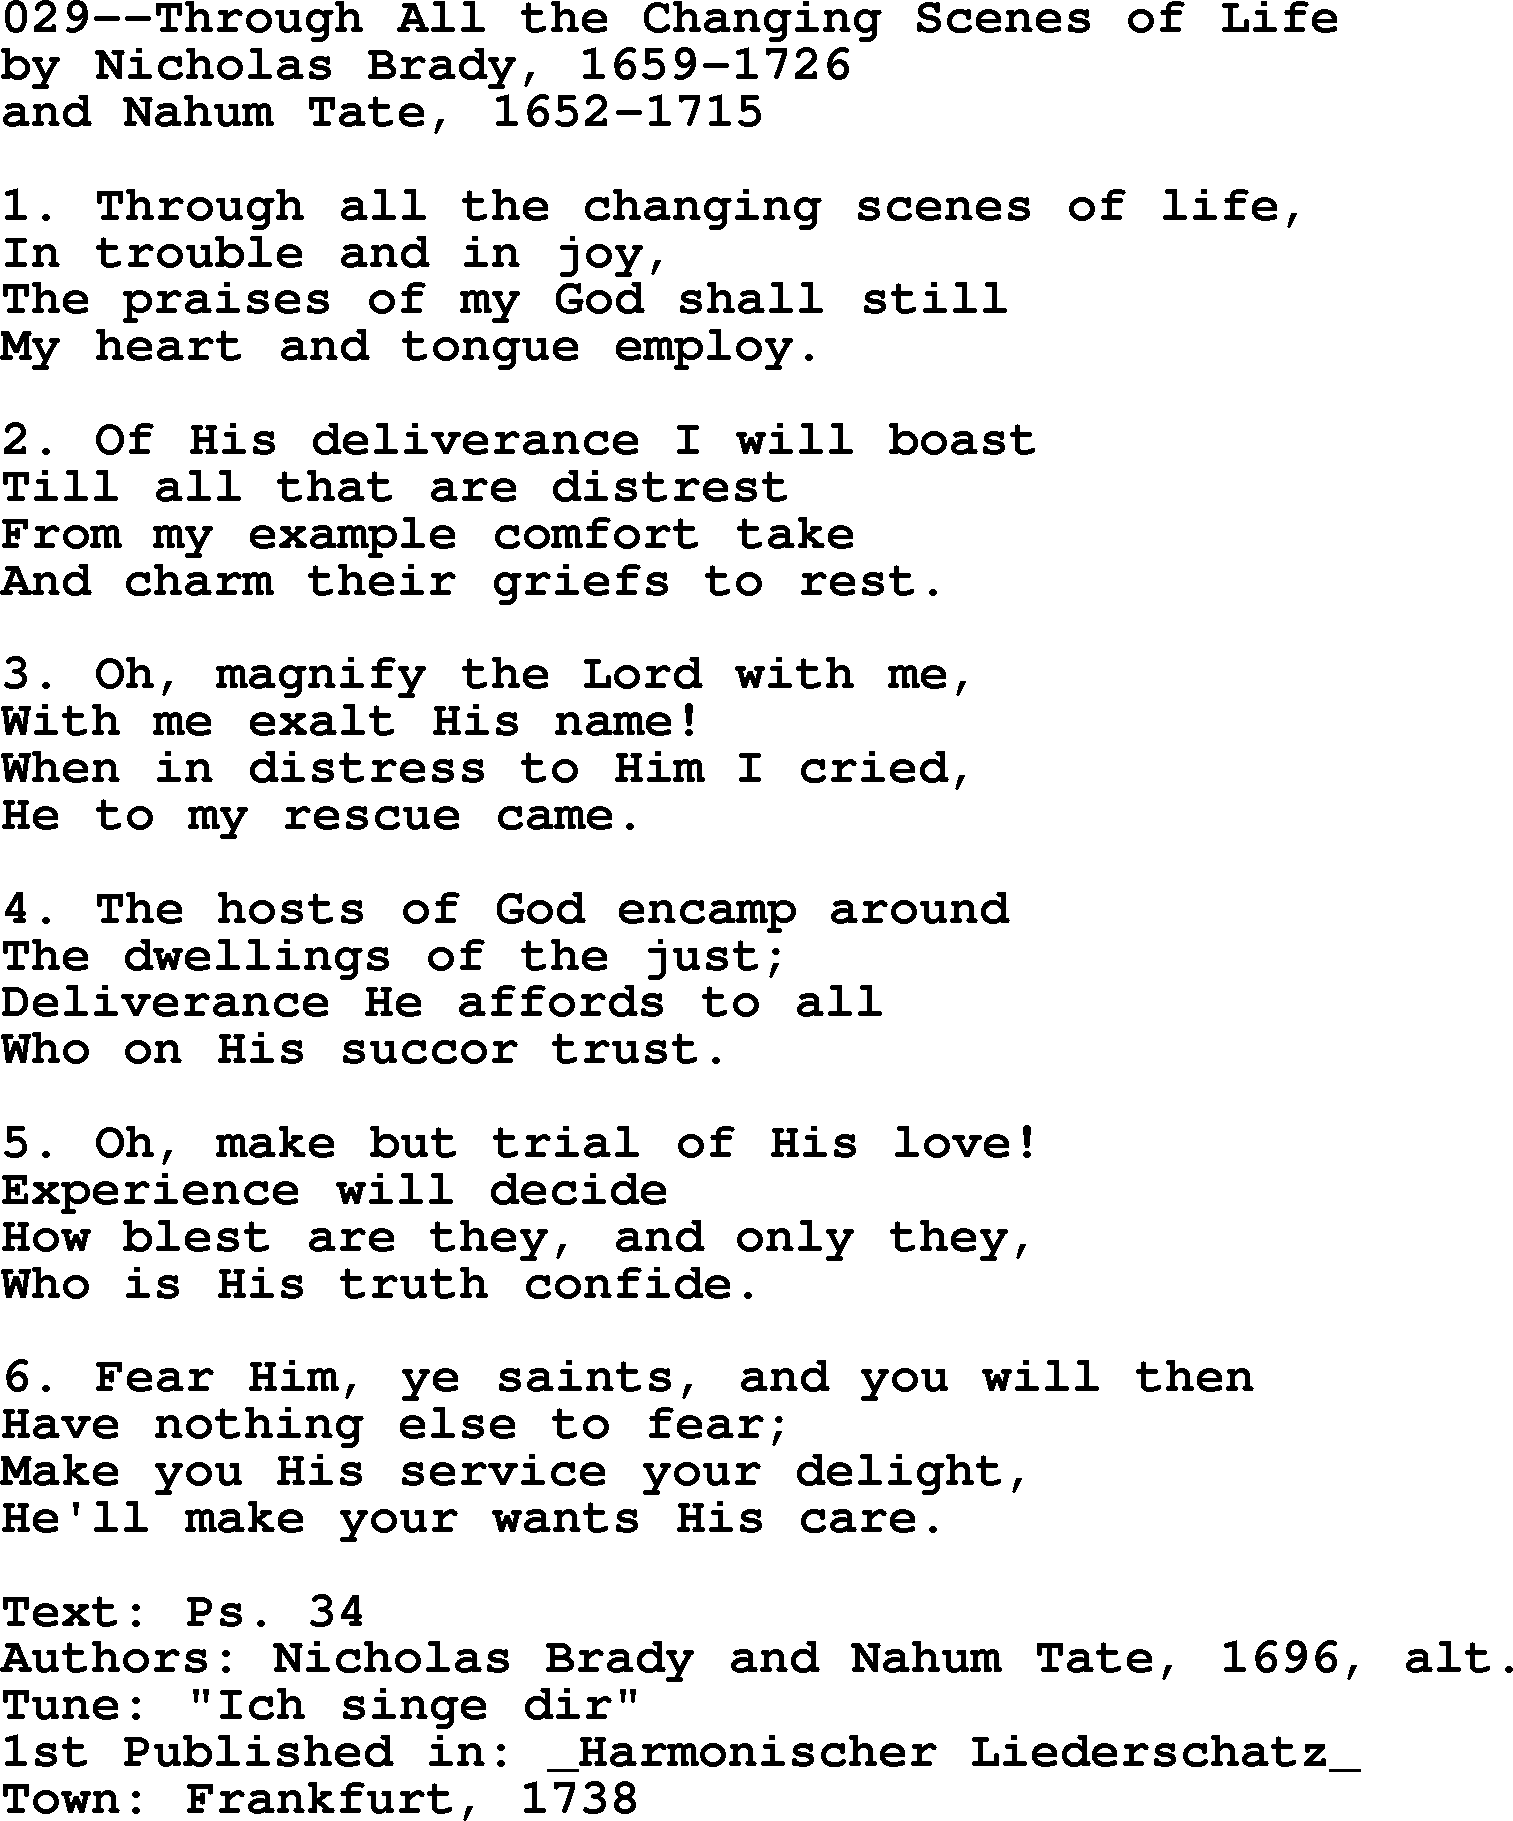 Lutheran Hymn: 029--Through All the Changing Scenes of Life.txt lyrics with PDF